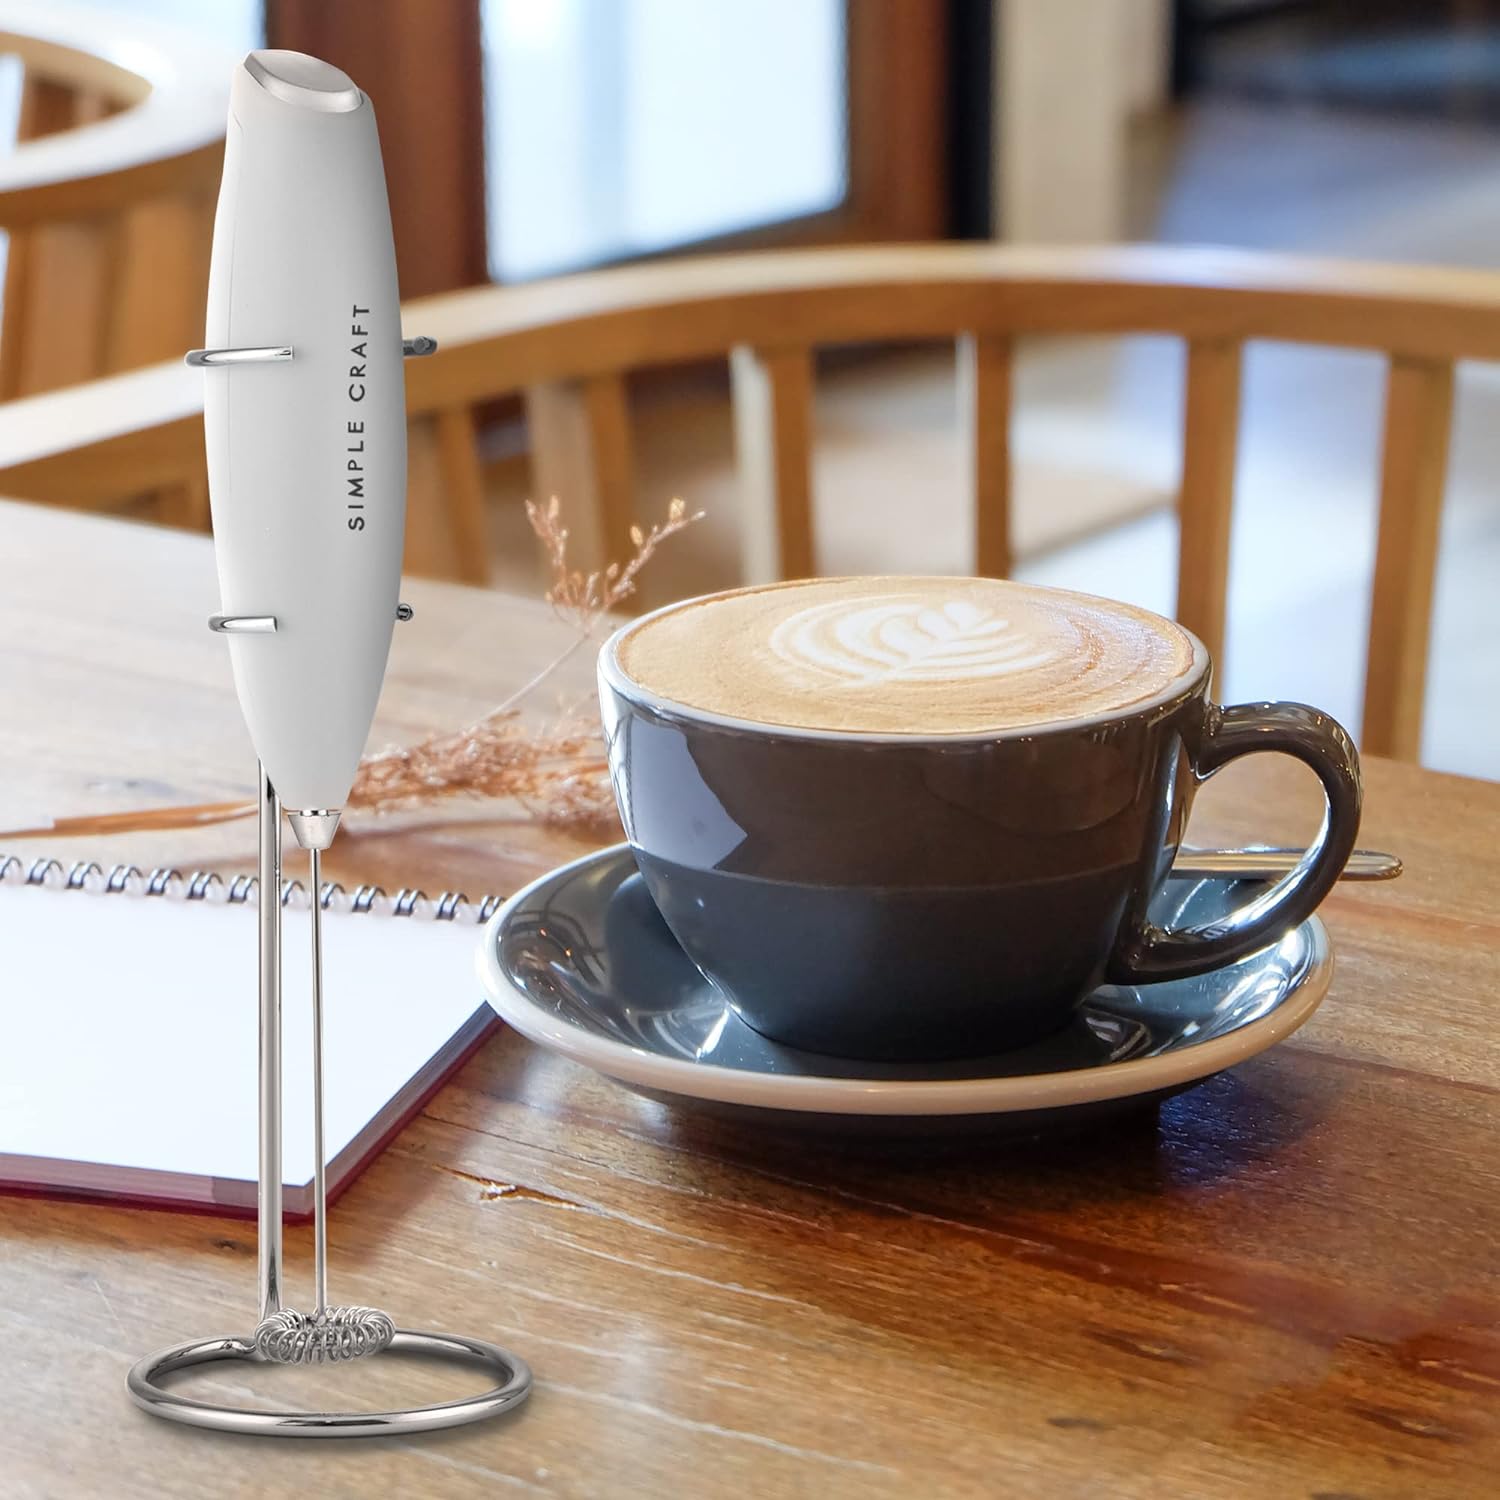 Zulay Powerful Milk Frother for Coffee latte handheld blender